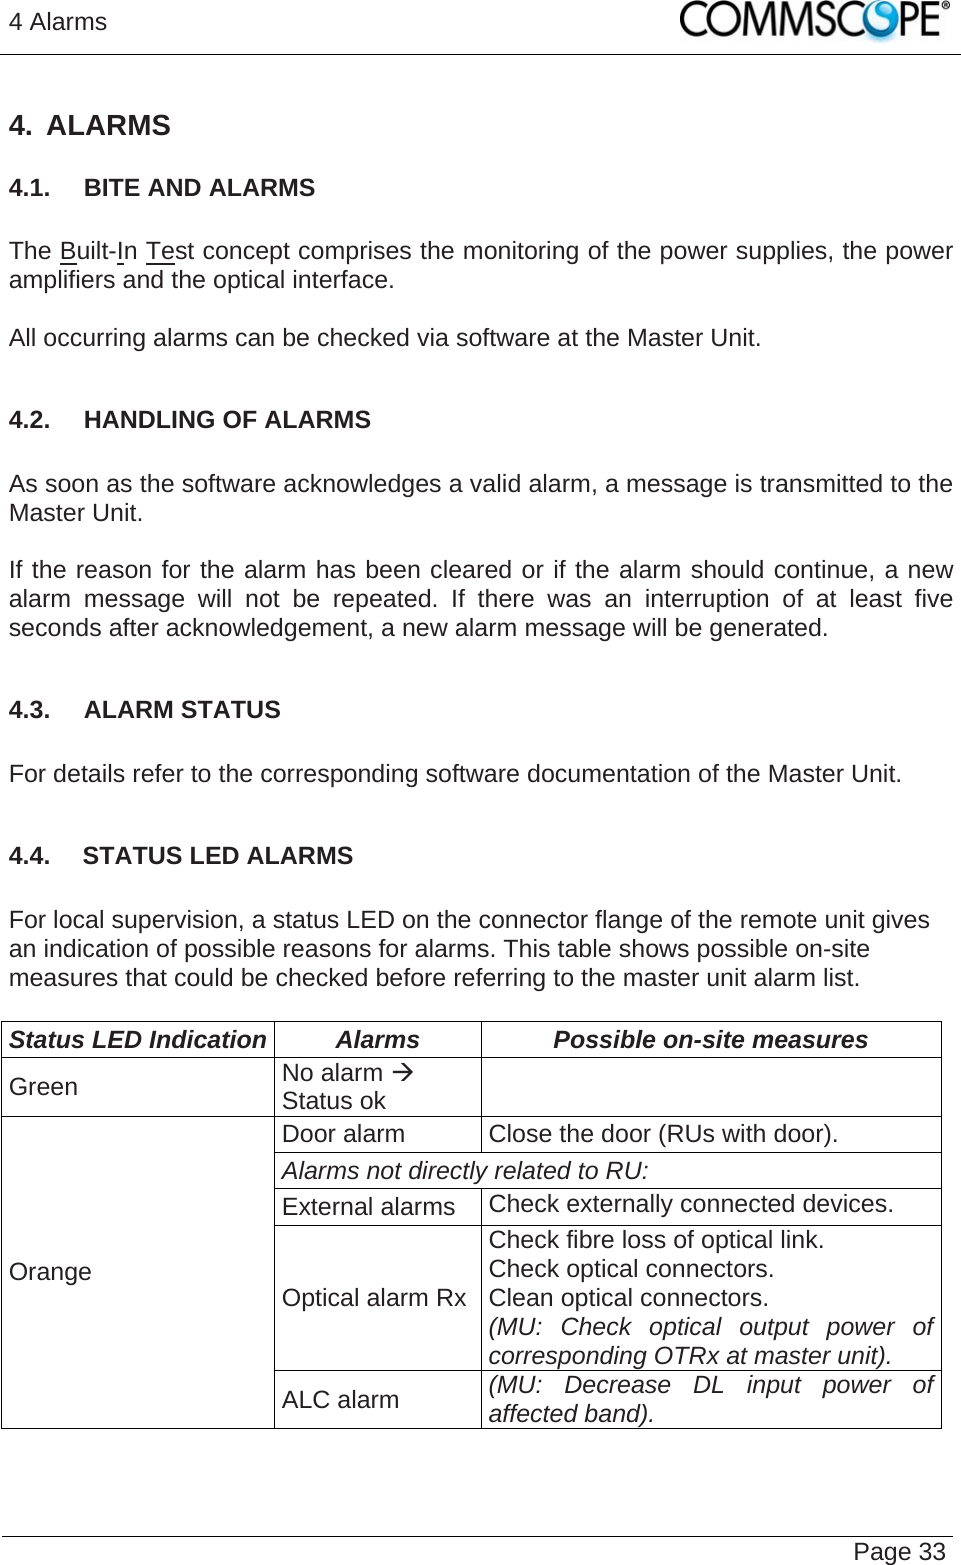 4 Alarms   Page 33 4. ALARMS 4.1.  BITE AND ALARMS  The Built-In Test concept comprises the monitoring of the power supplies, the power amplifiers and the optical interface.  All occurring alarms can be checked via software at the Master Unit.  4.2.  HANDLING OF ALARMS  As soon as the software acknowledges a valid alarm, a message is transmitted to the Master Unit.  If the reason for the alarm has been cleared or if the alarm should continue, a new alarm message will not be repeated. If there was an interruption of at least five seconds after acknowledgement, a new alarm message will be generated.  4.3.  ALARM STATUS  For details refer to the corresponding software documentation of the Master Unit.  4.4.  STATUS LED ALARMS  For local supervision, a status LED on the connector flange of the remote unit gives an indication of possible reasons for alarms. This table shows possible on-site measures that could be checked before referring to the master unit alarm list.  Status LED Indication  Alarms  Possible on-site measures Green  No alarm Æ Status ok   Door alarm  Close the door (RUs with door). Alarms not directly related to RU:  External alarms  Check externally connected devices. Optical alarm Rx Check fibre loss of optical link. Check optical connectors. Clean optical connectors. (MU: Check optical output power of corresponding OTRx at master unit). Orange ALC alarm  (MU: Decrease DL input power of affected band). 